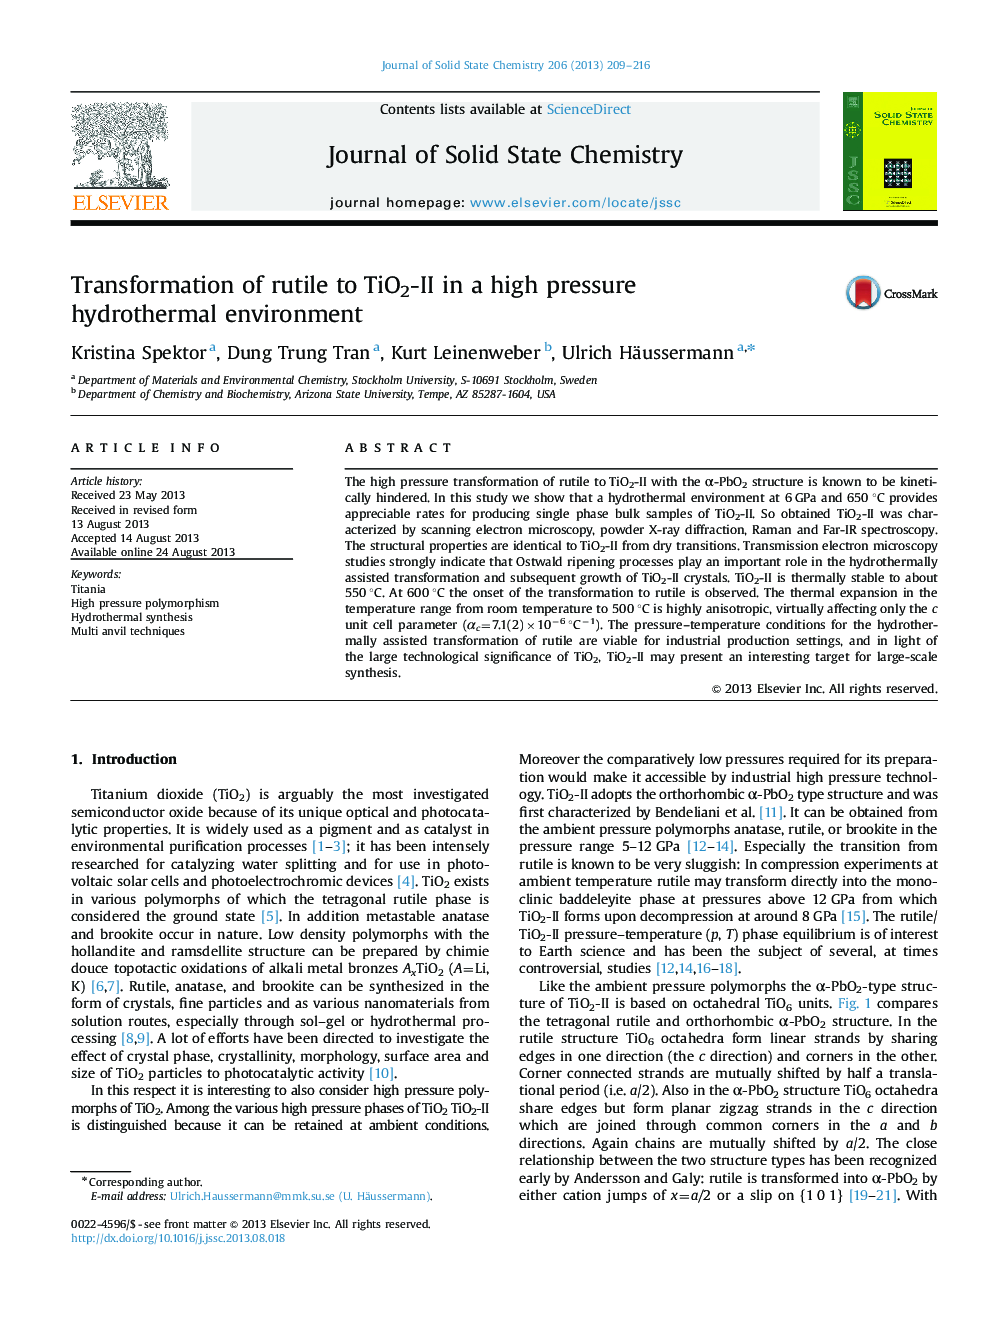 Transformation of rutile to TiO2-II in a high pressure hydrothermal environment